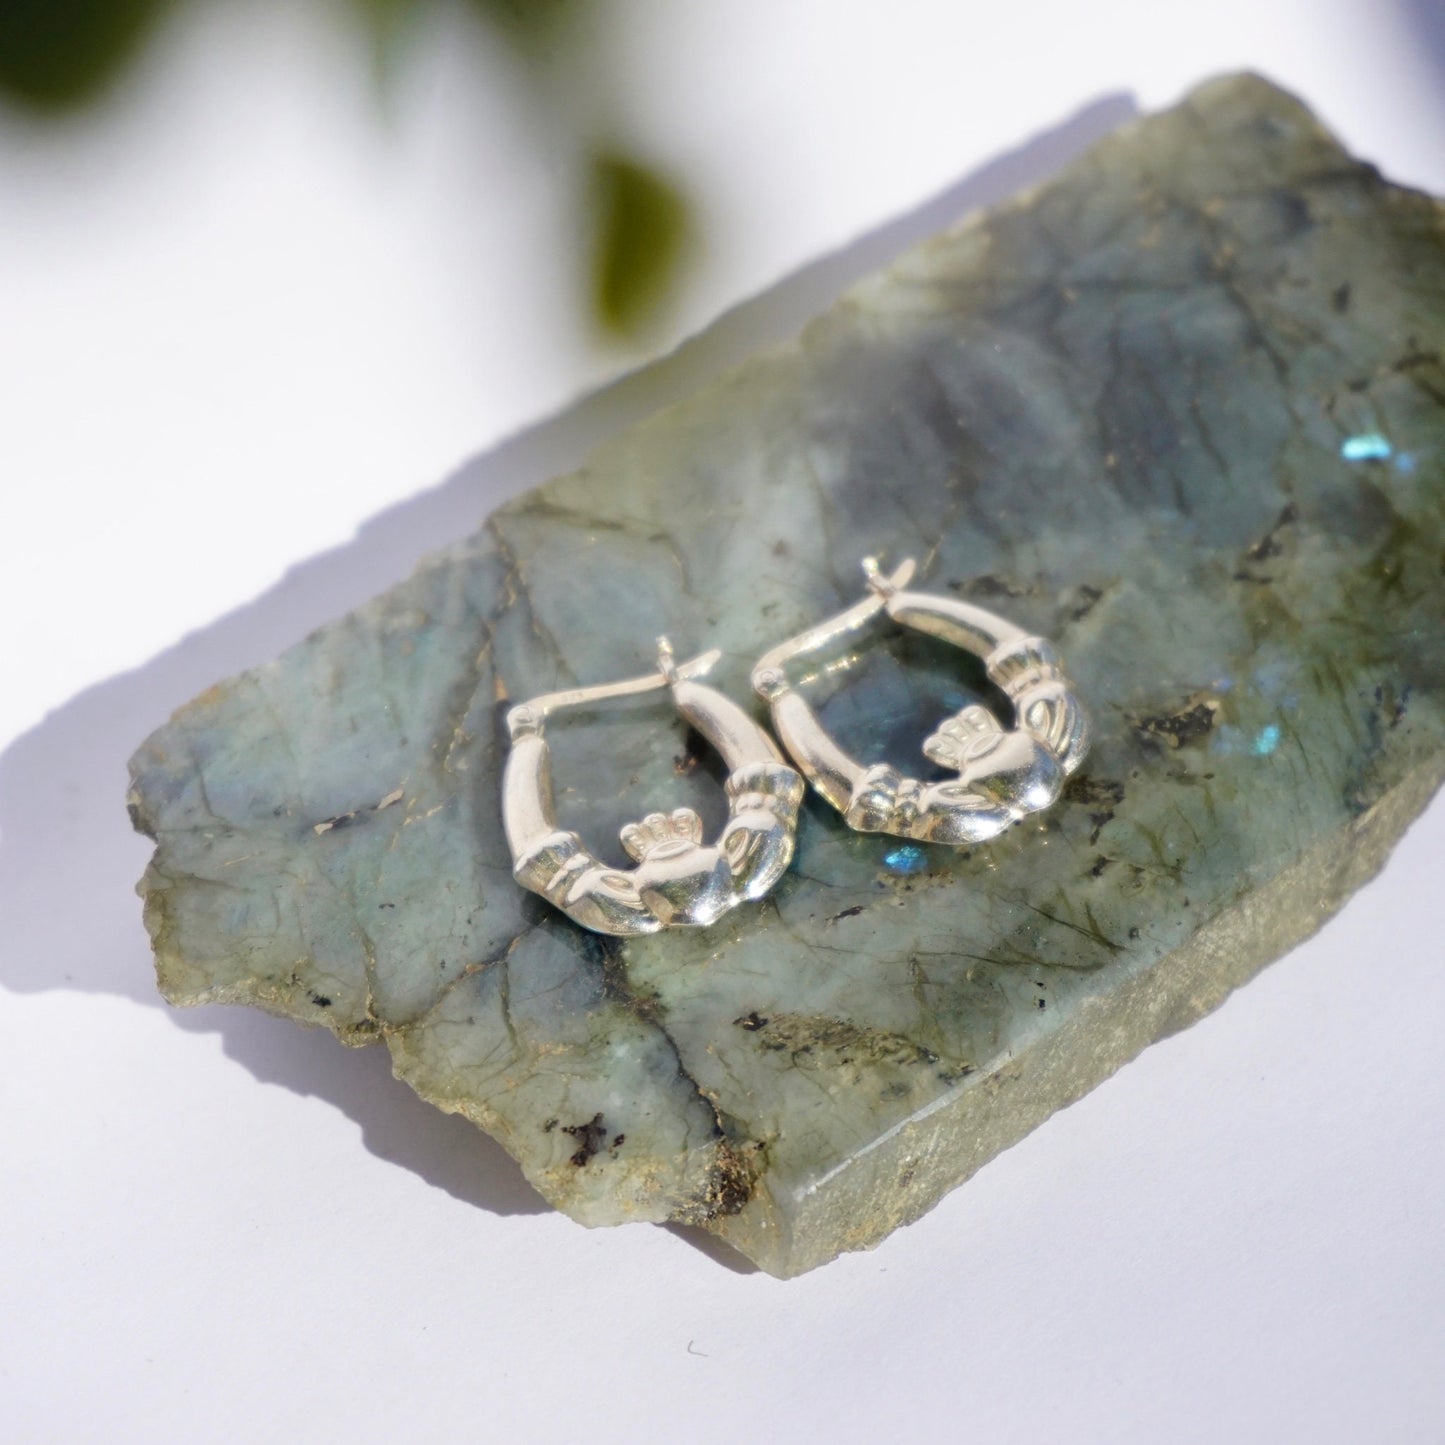 Vintage Sterling Silver Claddagh Hoop Earrings displayed on mineral slab, featuring Classic Irish Symbol for Love, Loyalty, and Friendship, 925 Stamped Jewelry.